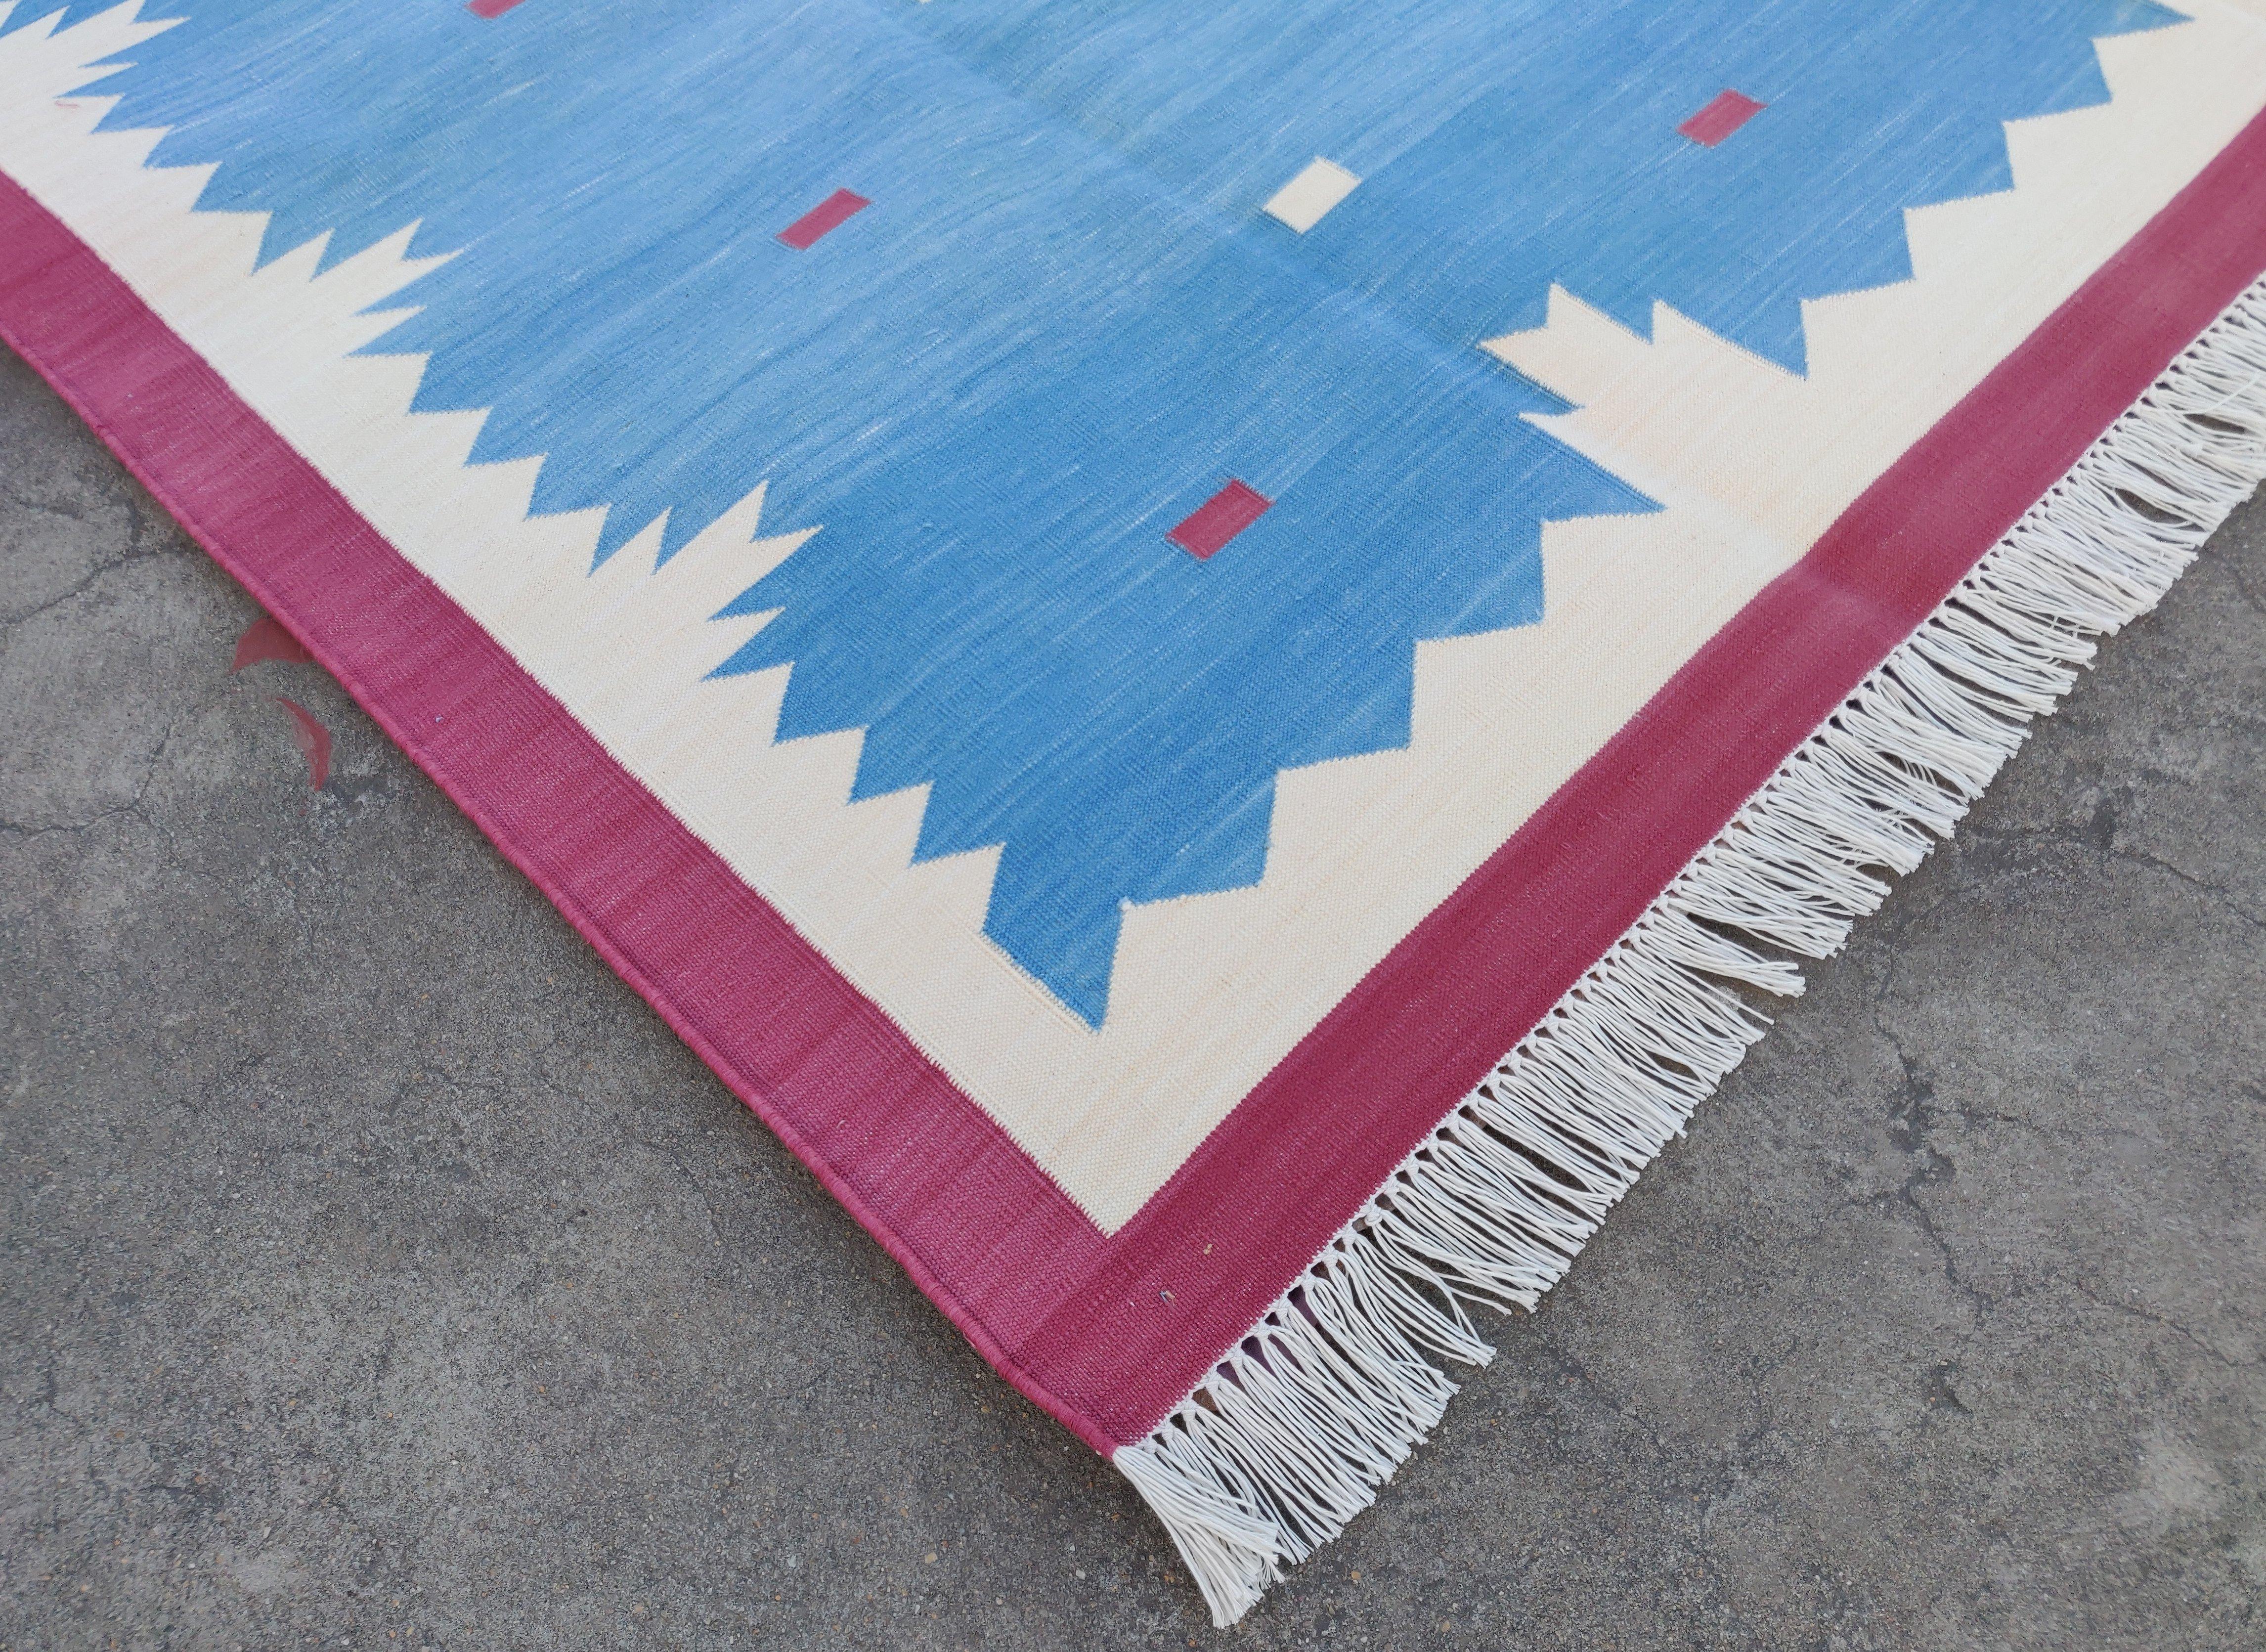 Cotton Vegetable Dyed Sky Blue, Cream And Raspberry Pink Geometric Indian Dhurrie Rug-6'x9' 
These special flat-weave dhurries are hand-woven with 15 ply 100% cotton yarn. Due to the special manufacturing techniques used to create our rugs, the size